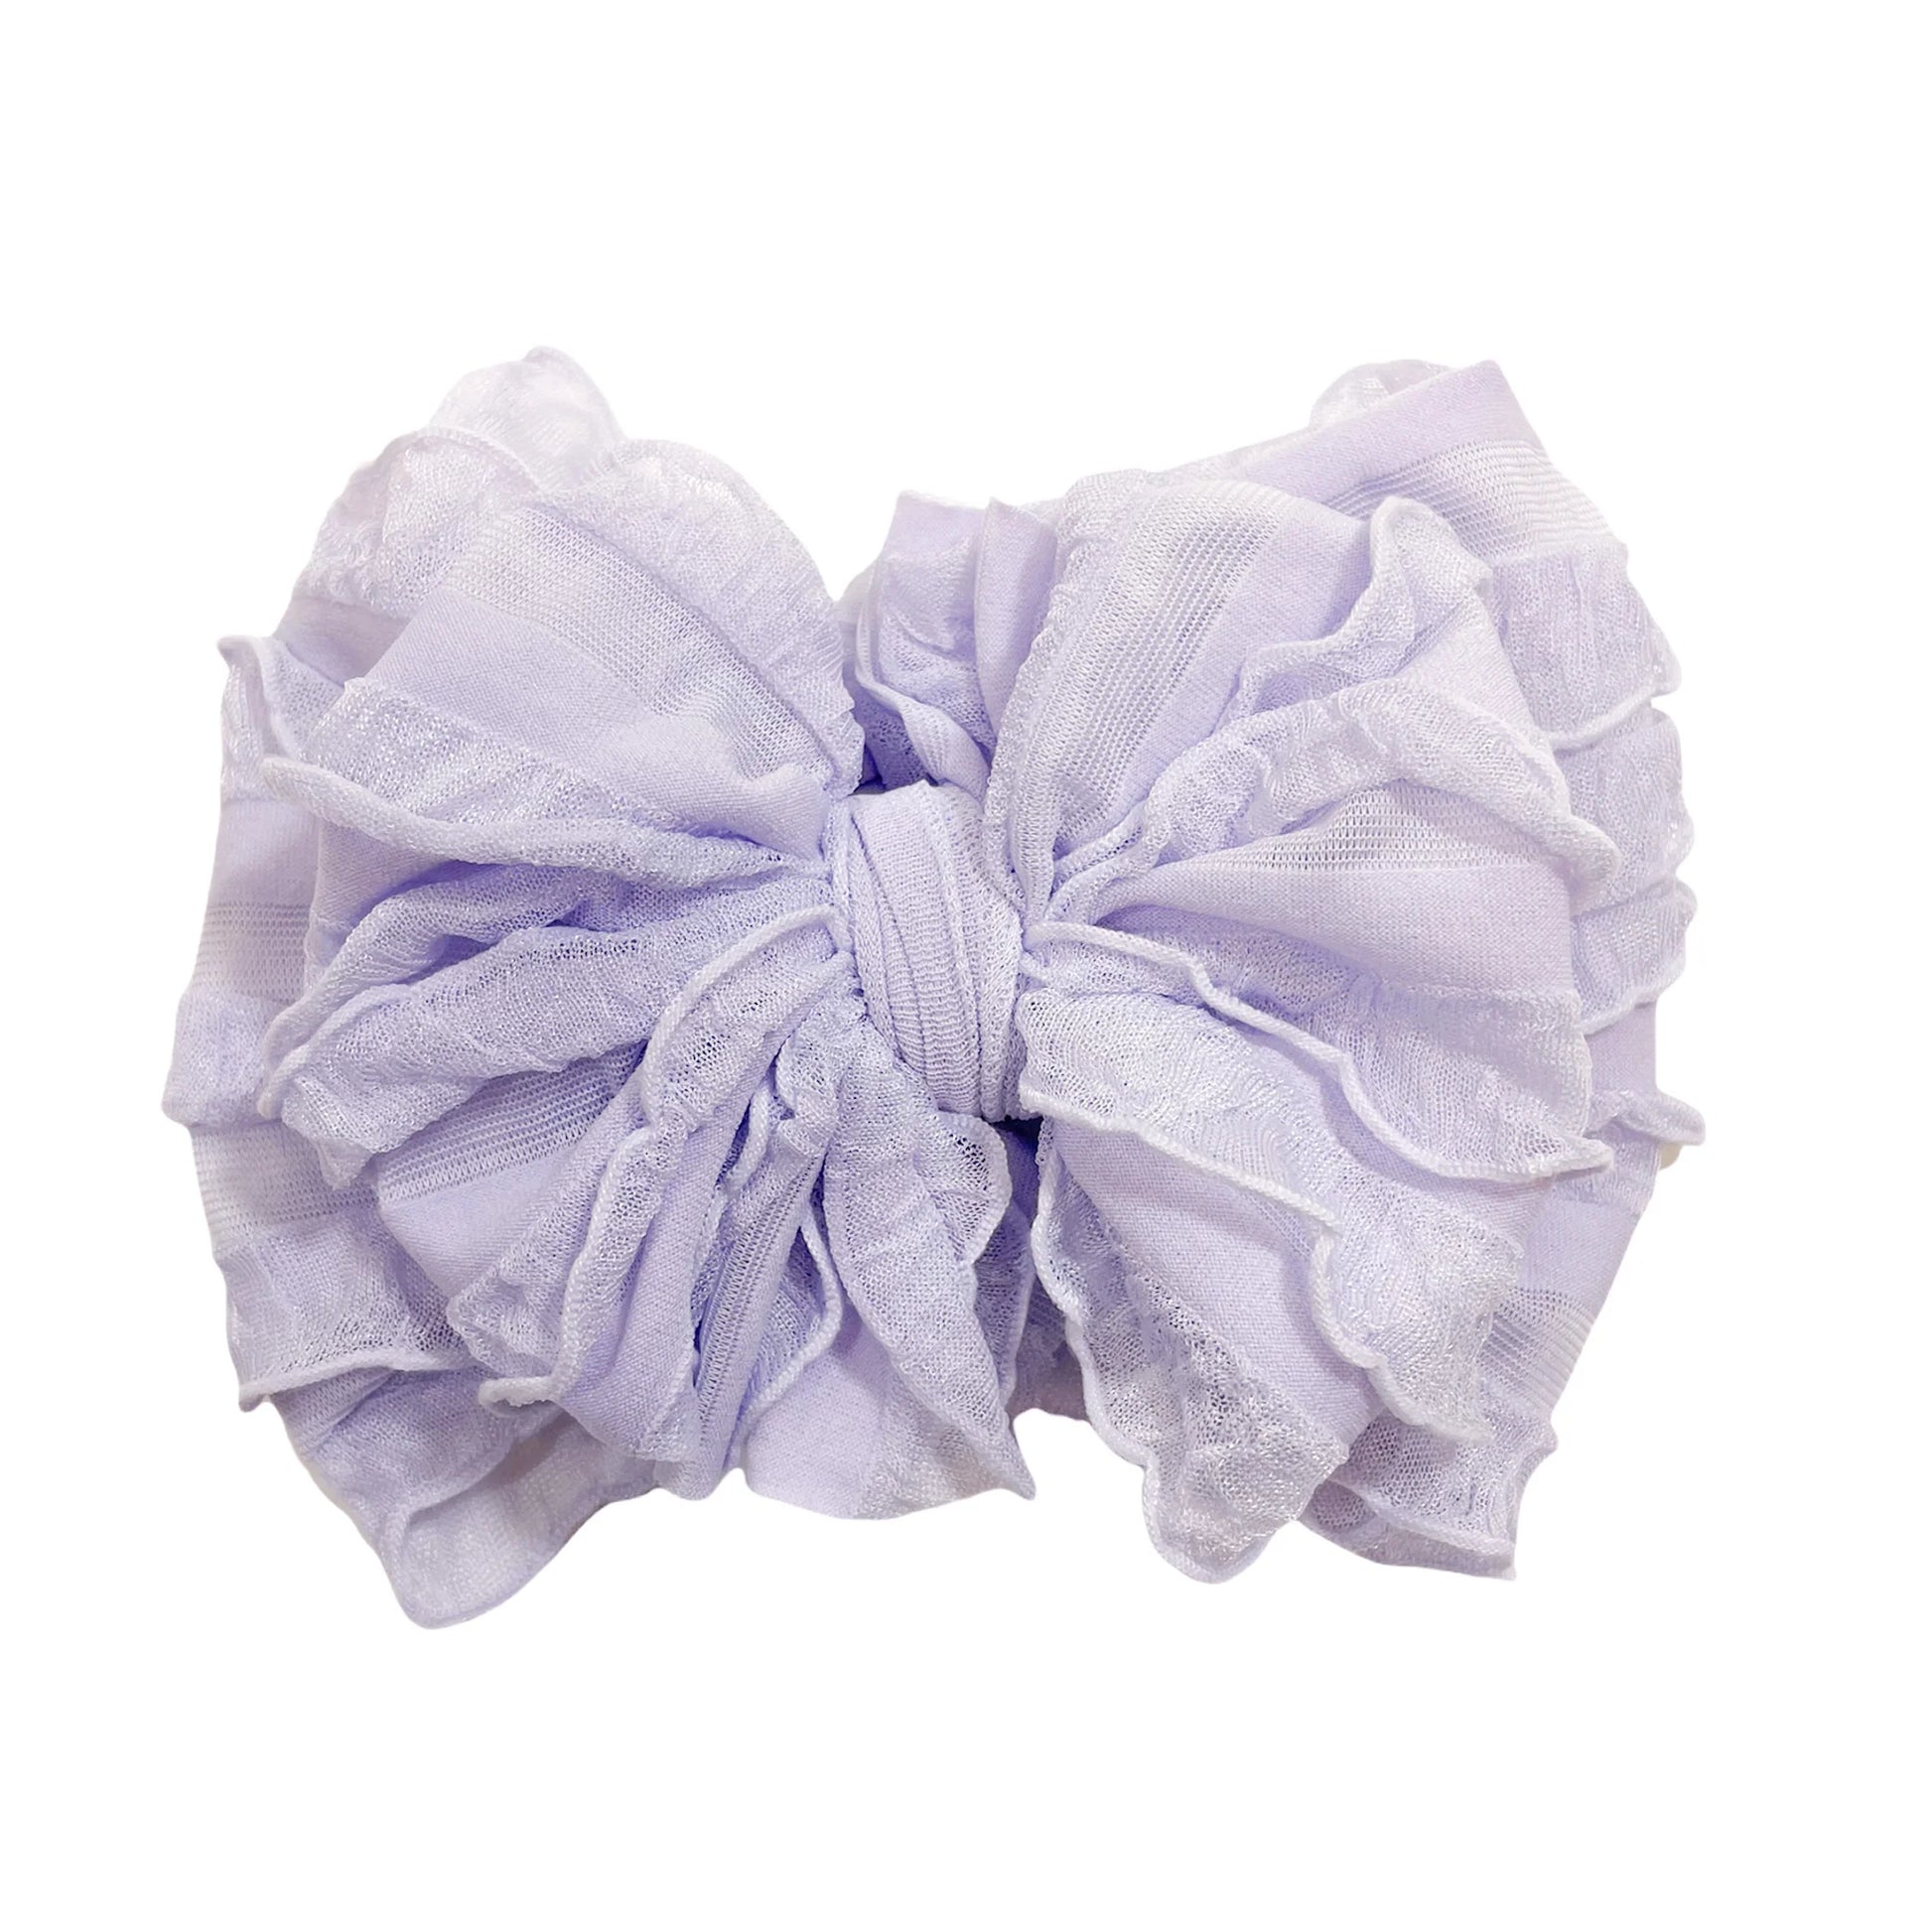 In Awe Couture Lavender Ruffled Headband